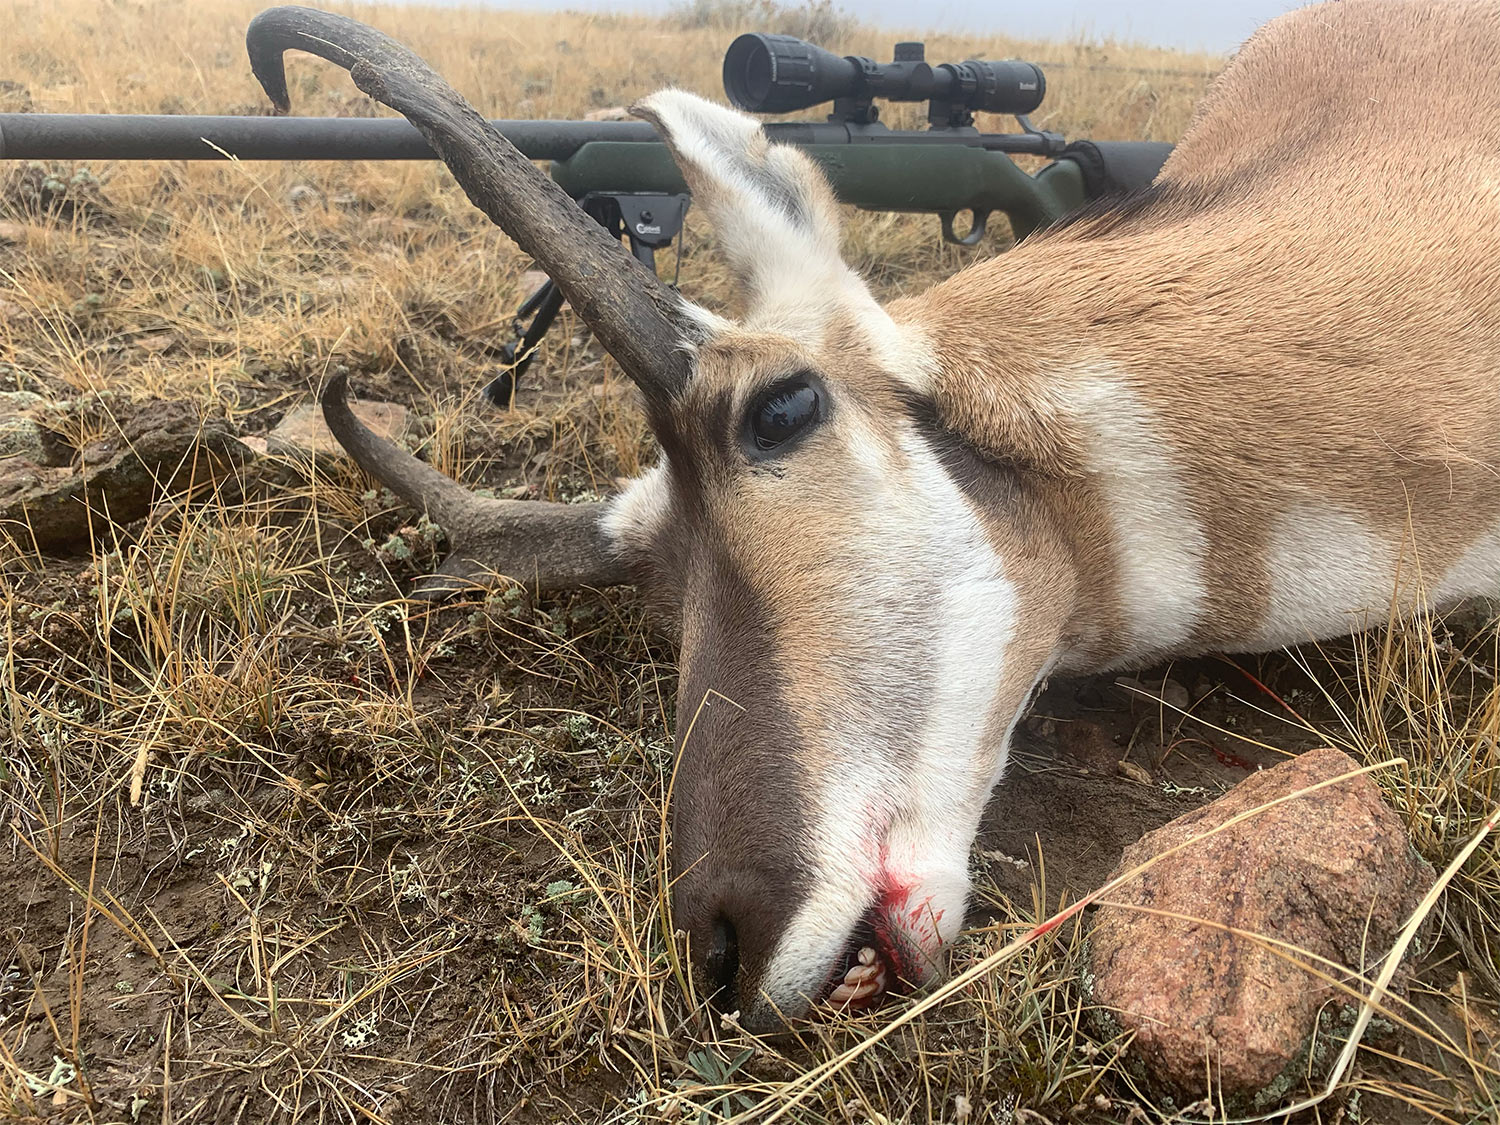 A dropped pronghorn antelope in a field.